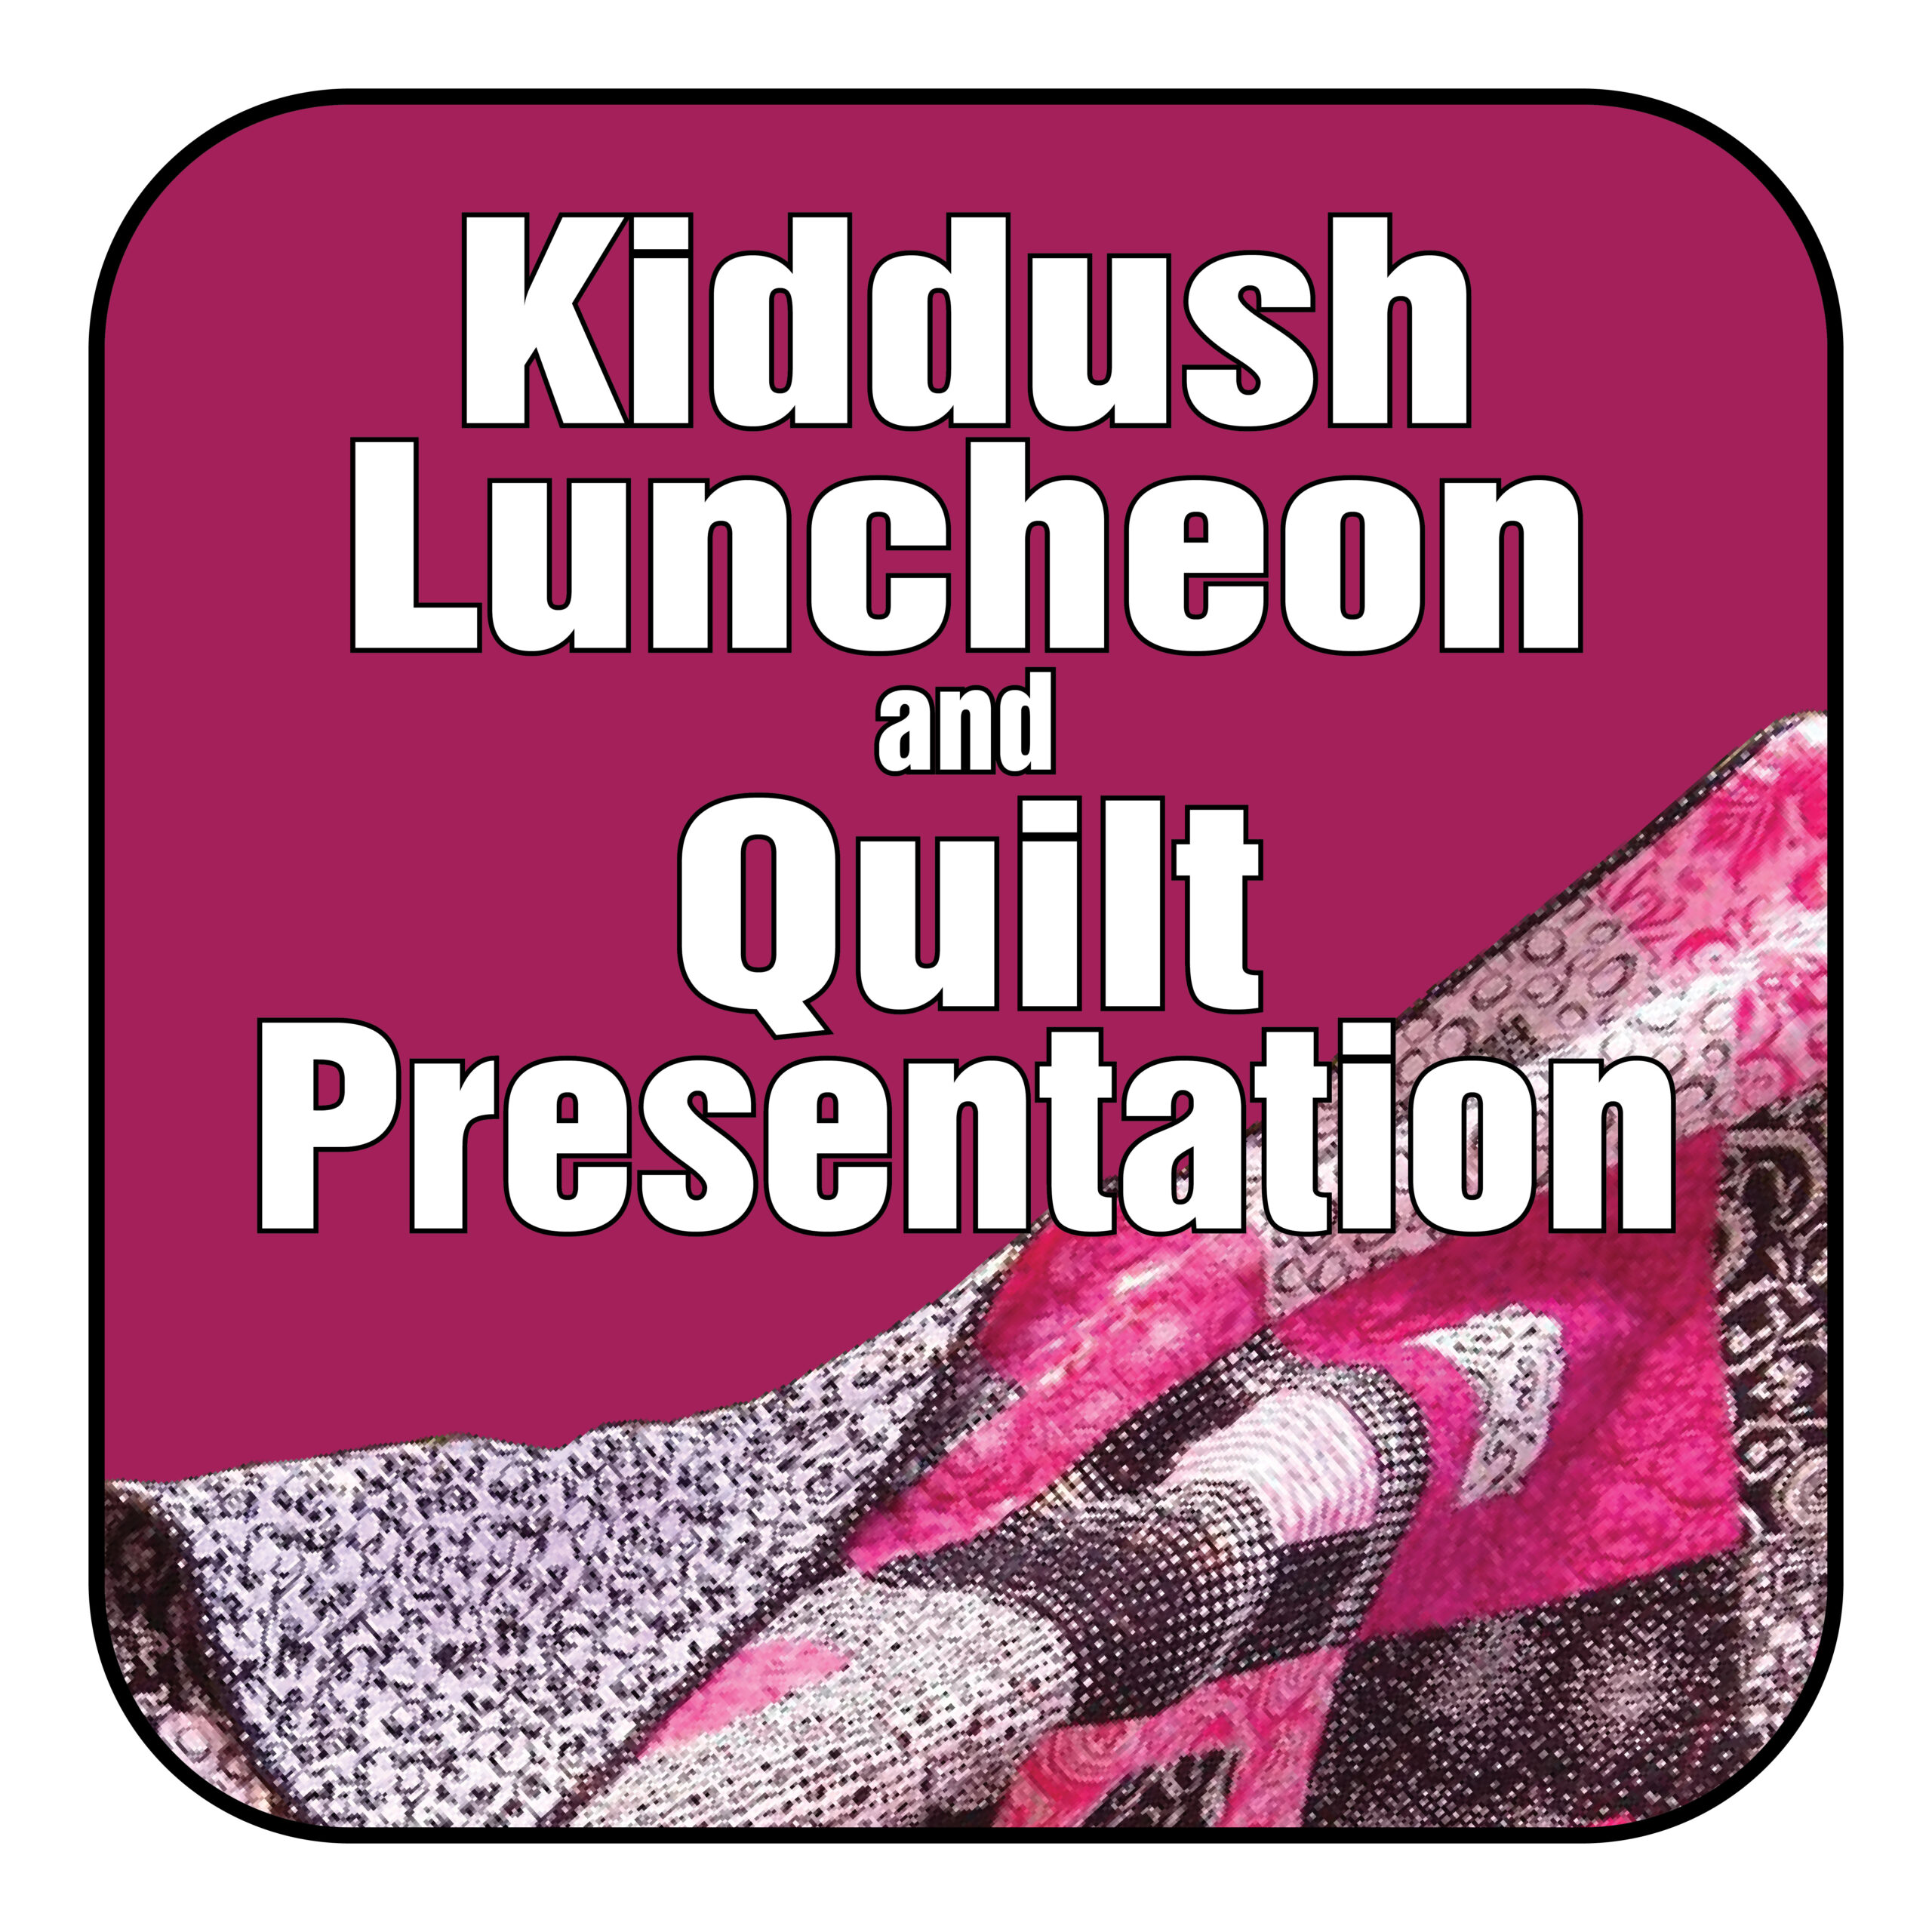 Website - kiddush luncheon and quilt